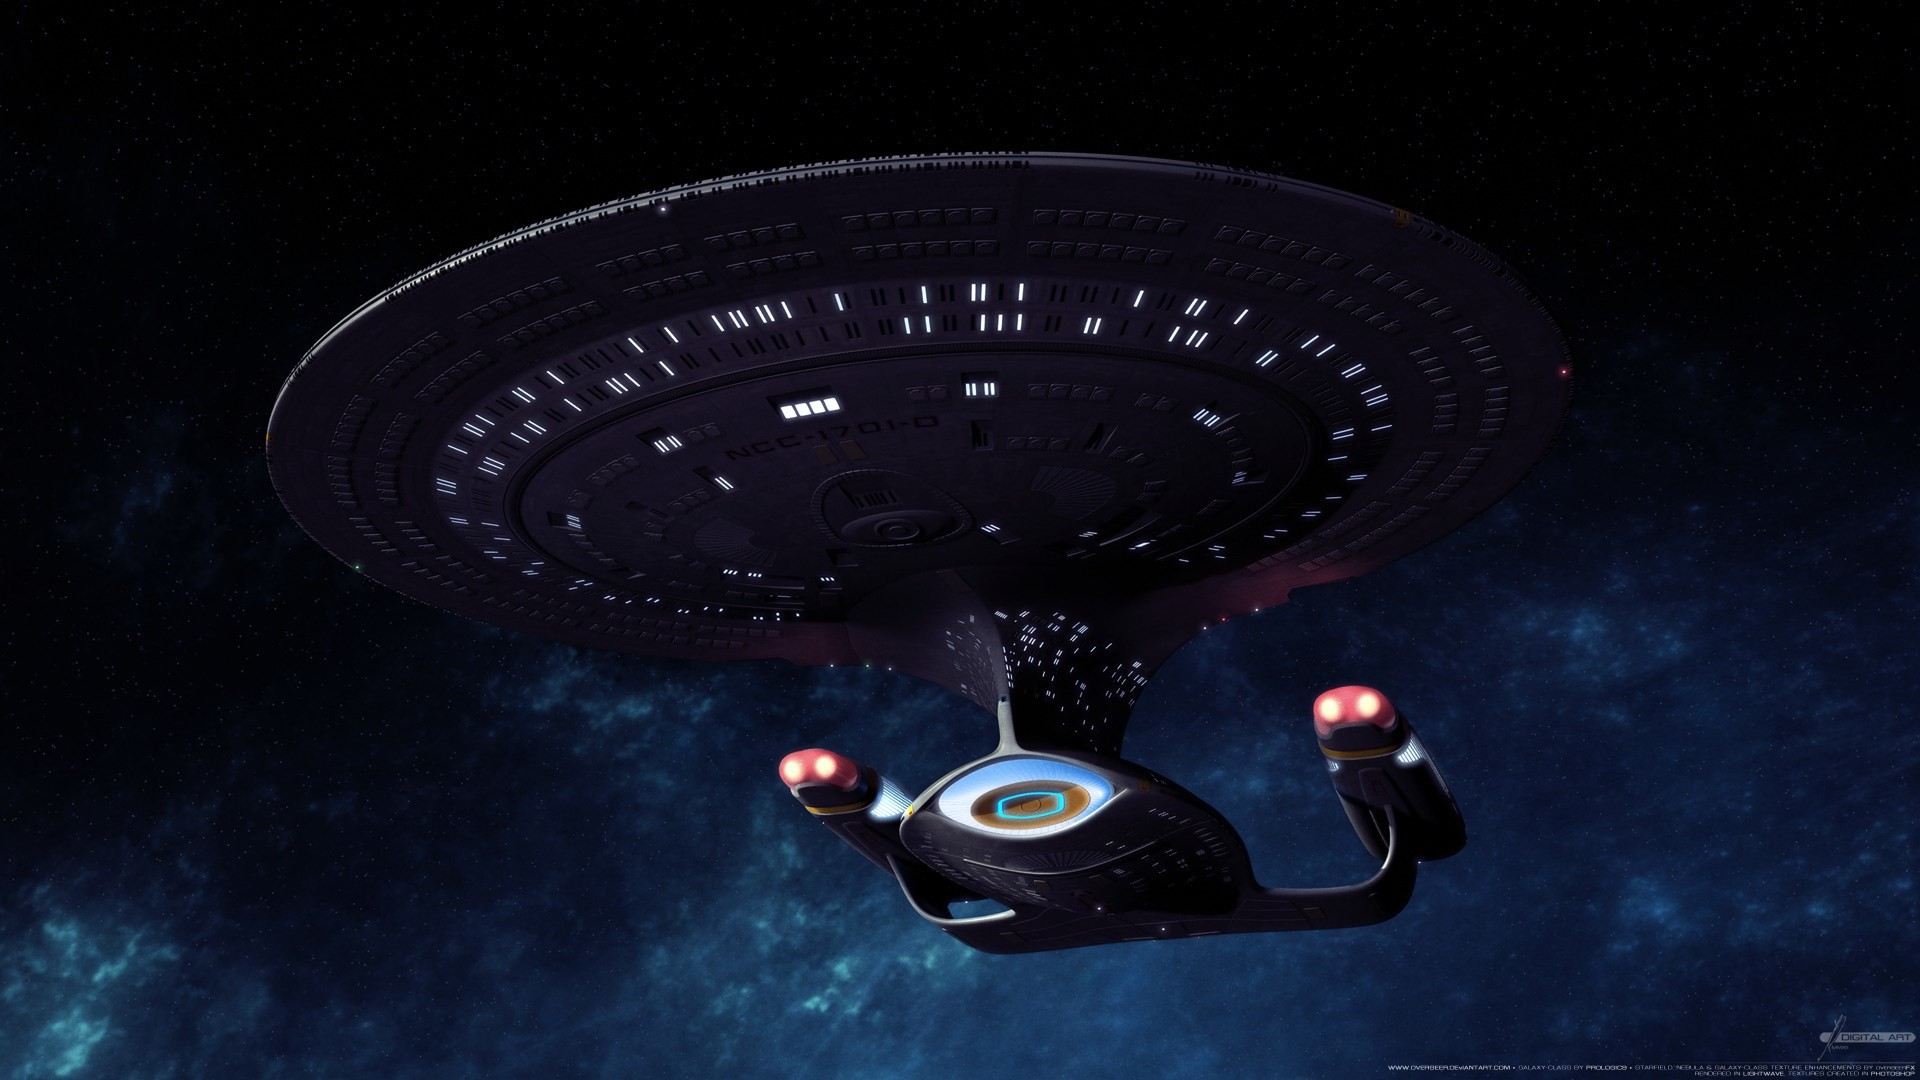 Px star trek the next generation picture – Background hd by Ormond Nash Williams